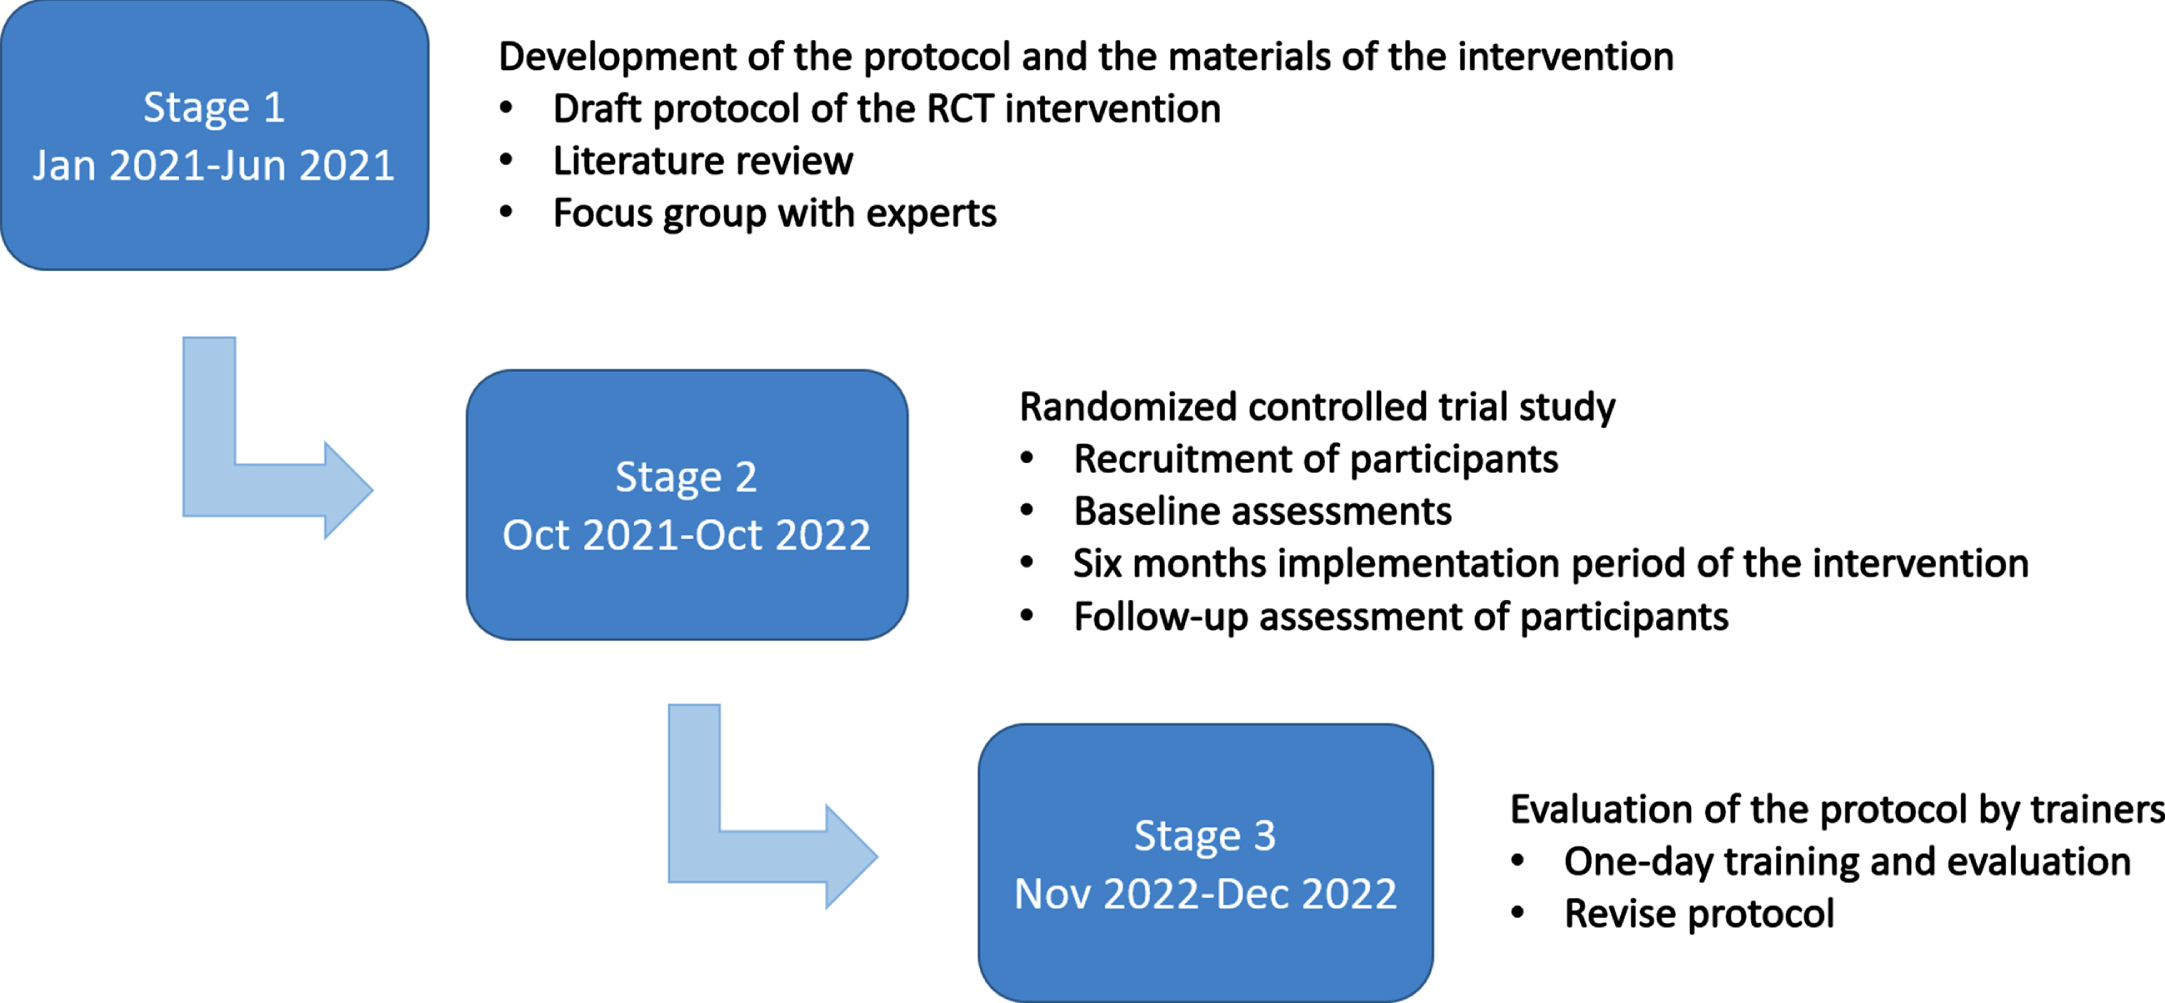 Timeline and stages for developing the E.L.So.M.C.I. intervention protocol.